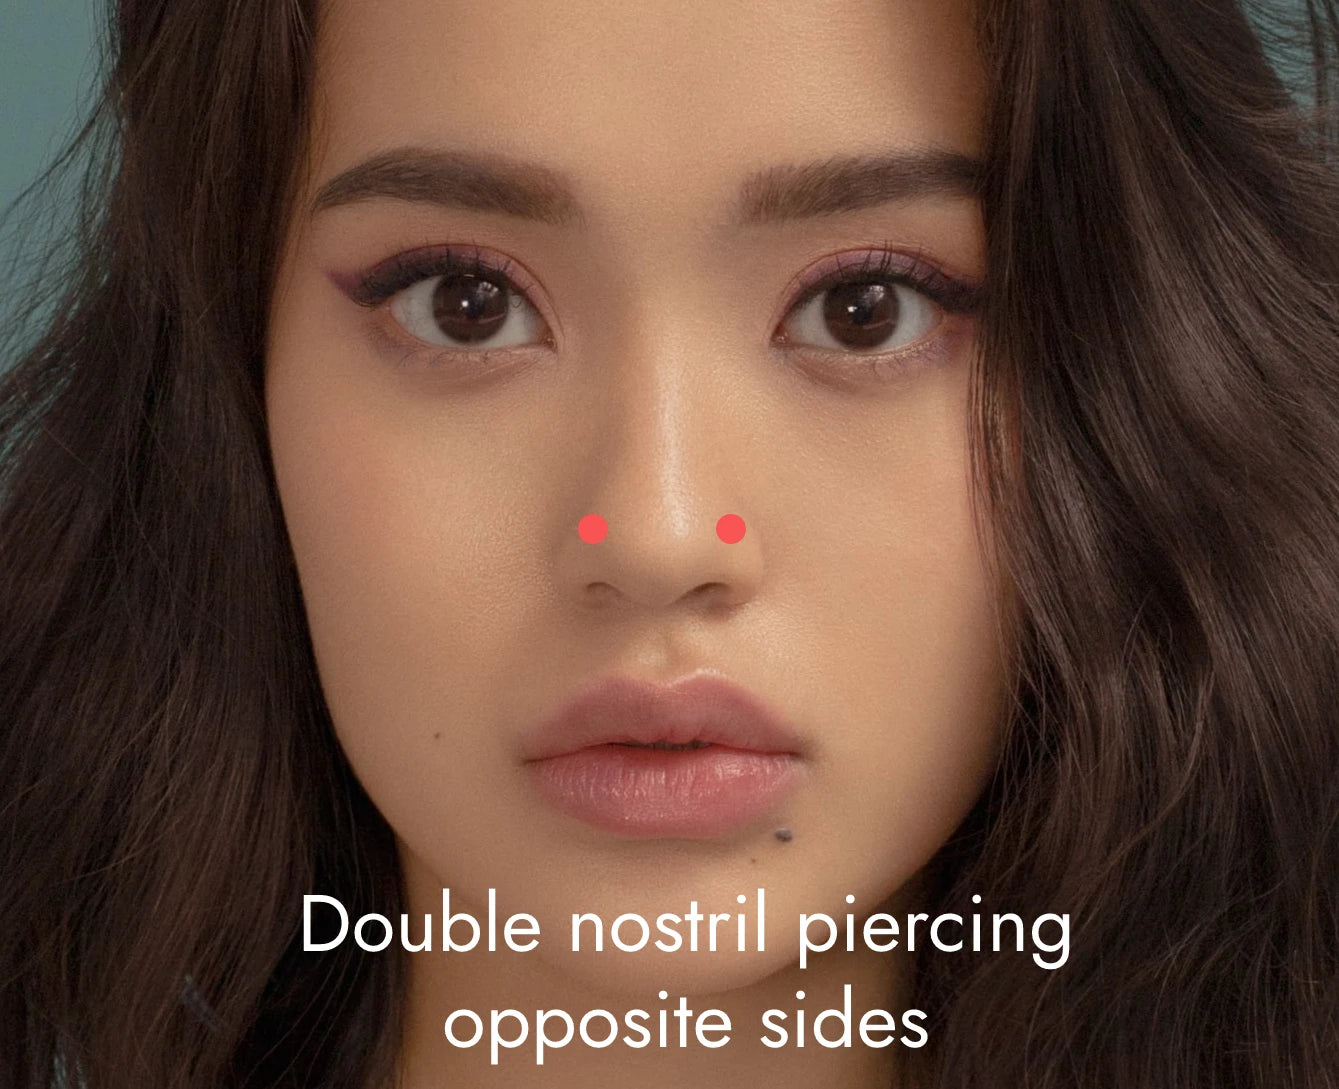 Double nose piercing opposite sides: Everything to know